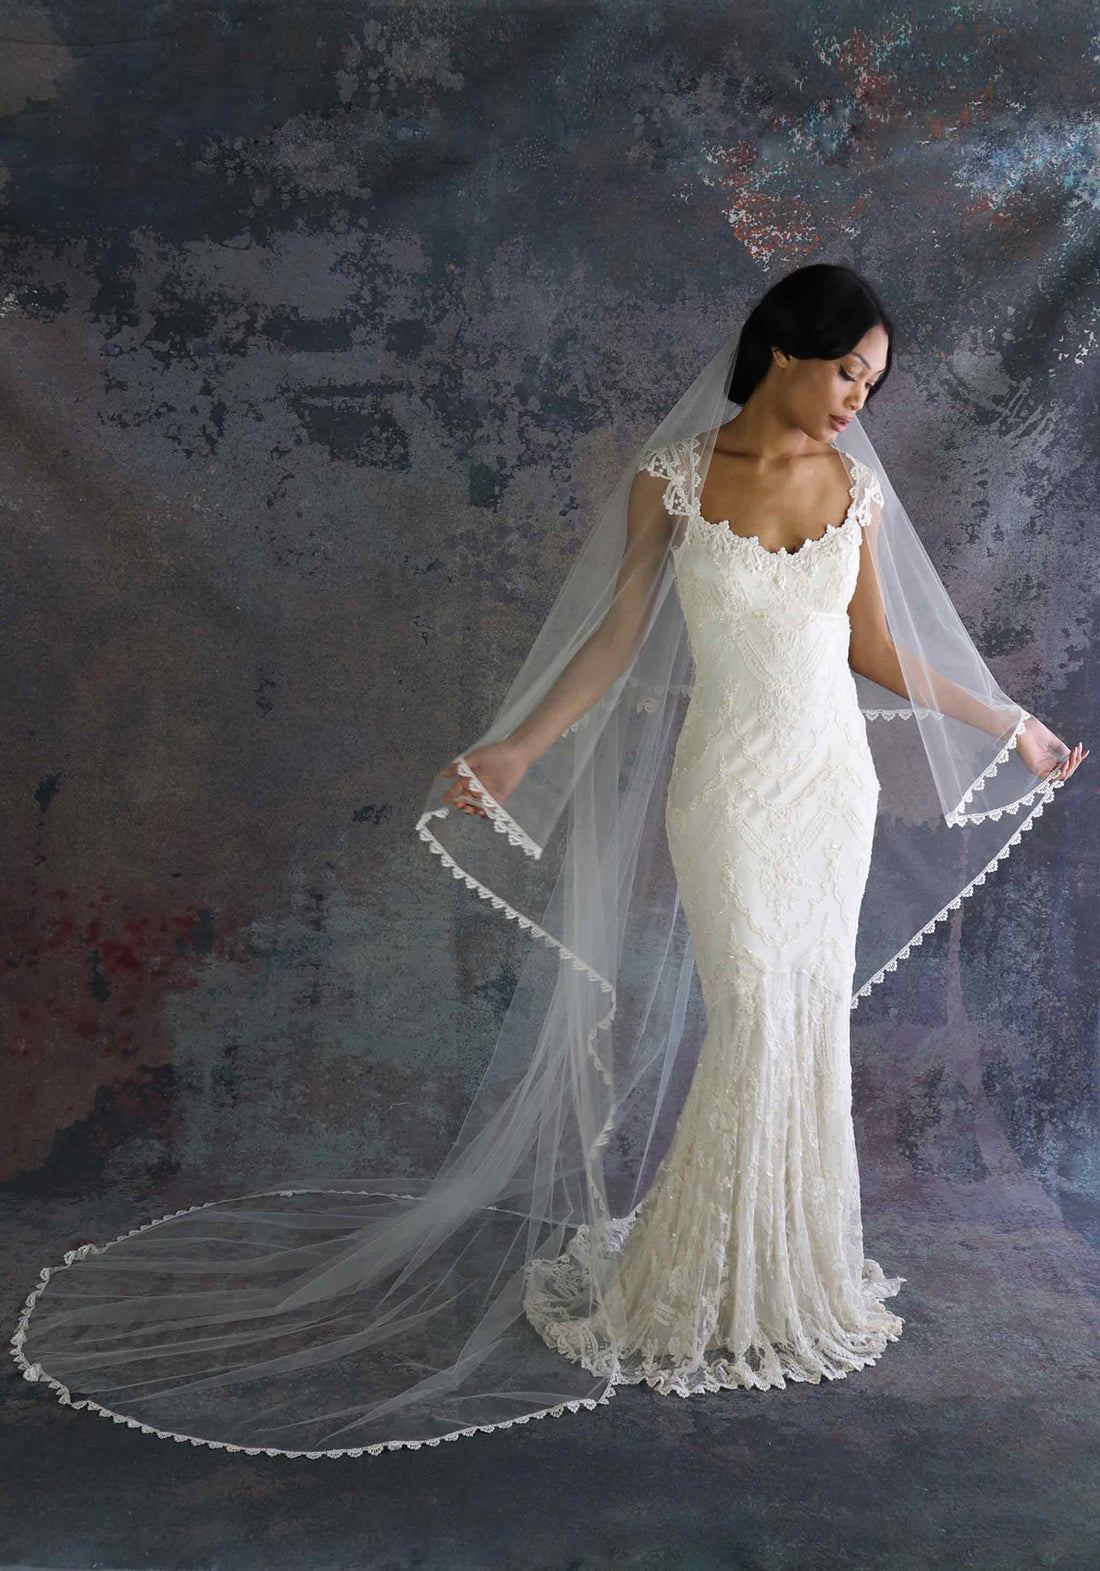 Vintage Style Lace Wedding Dresses u0026 Gowns by Claire Pettibone